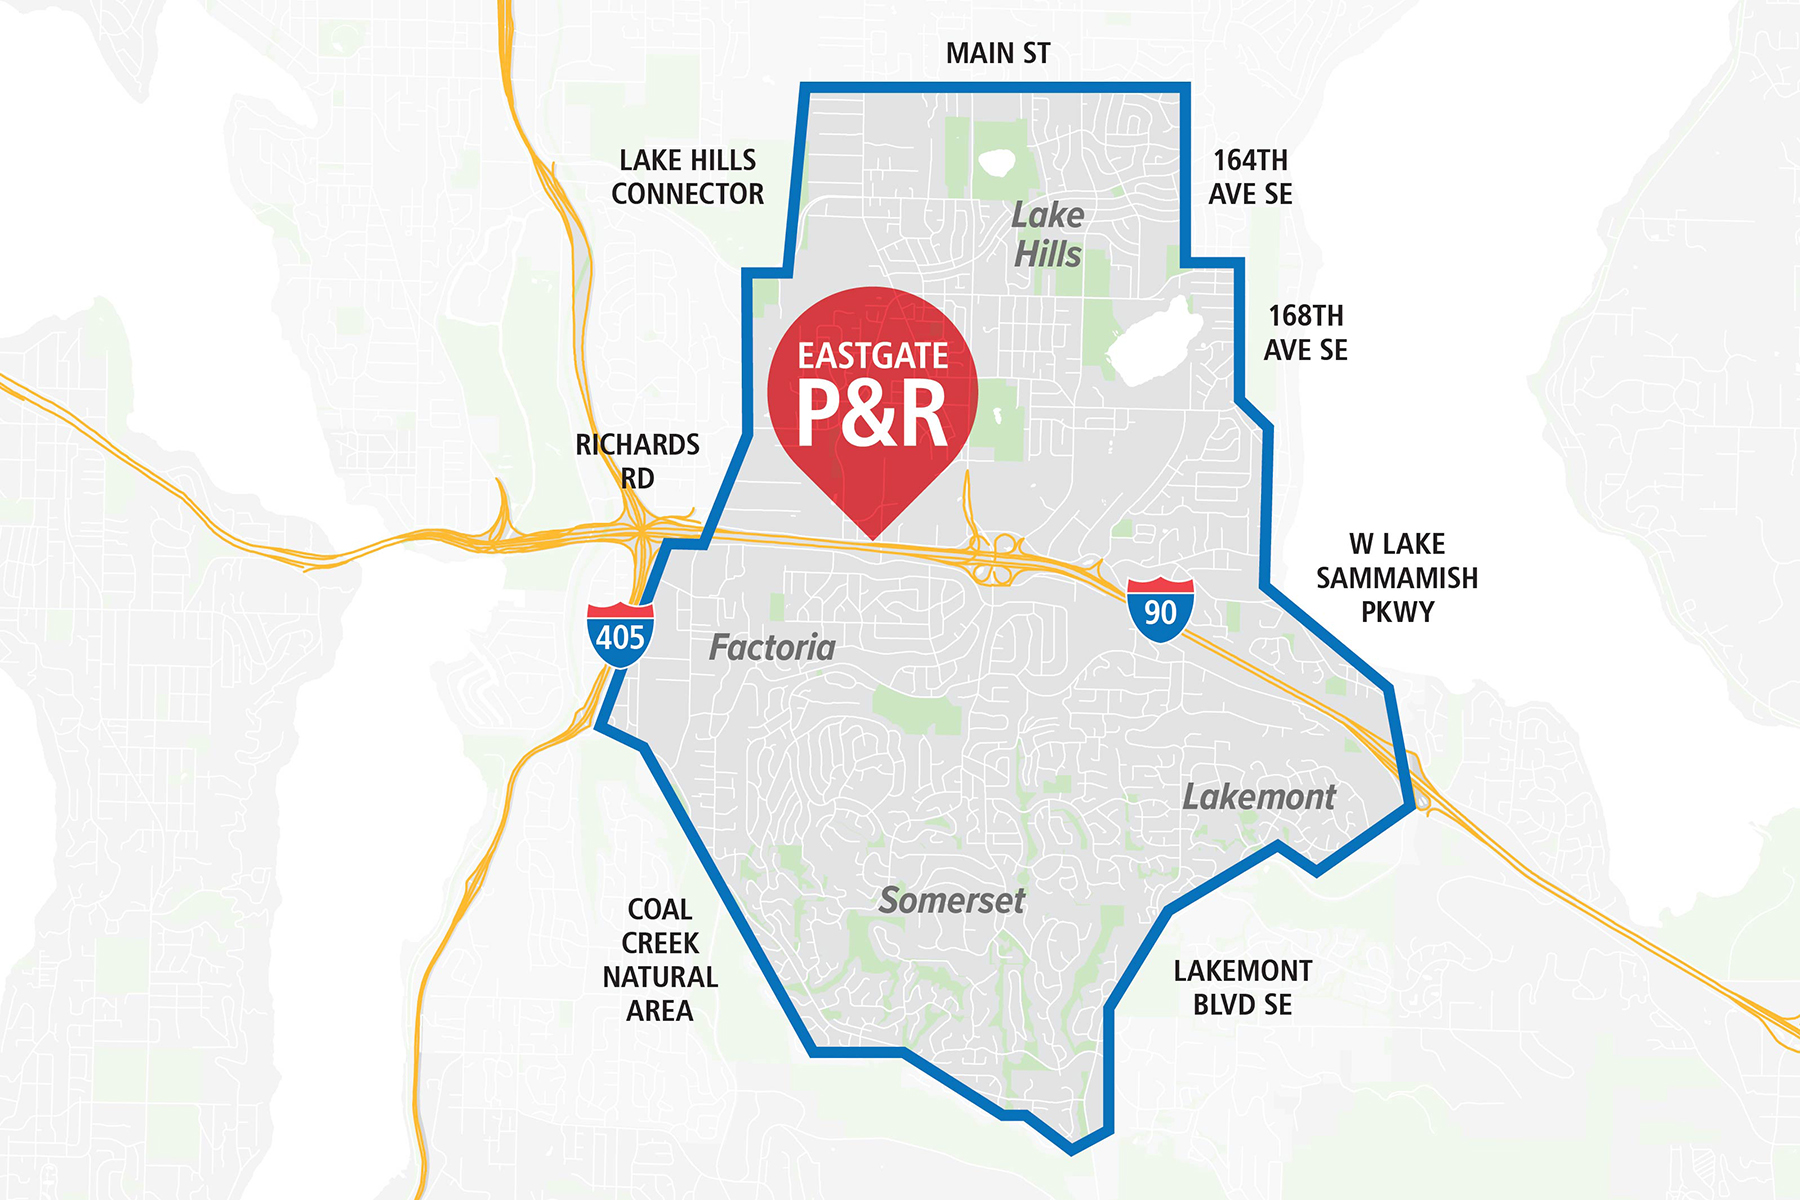 The service area for Eastgate Park and Ride is bordered by Main Street to the north, 164th, 168th, West Lake Samammish Parkway and Lakemont Boulevard SE to the west, Lake Hills Connector, Richards Road and the Coal Creek Natural Area to the east.